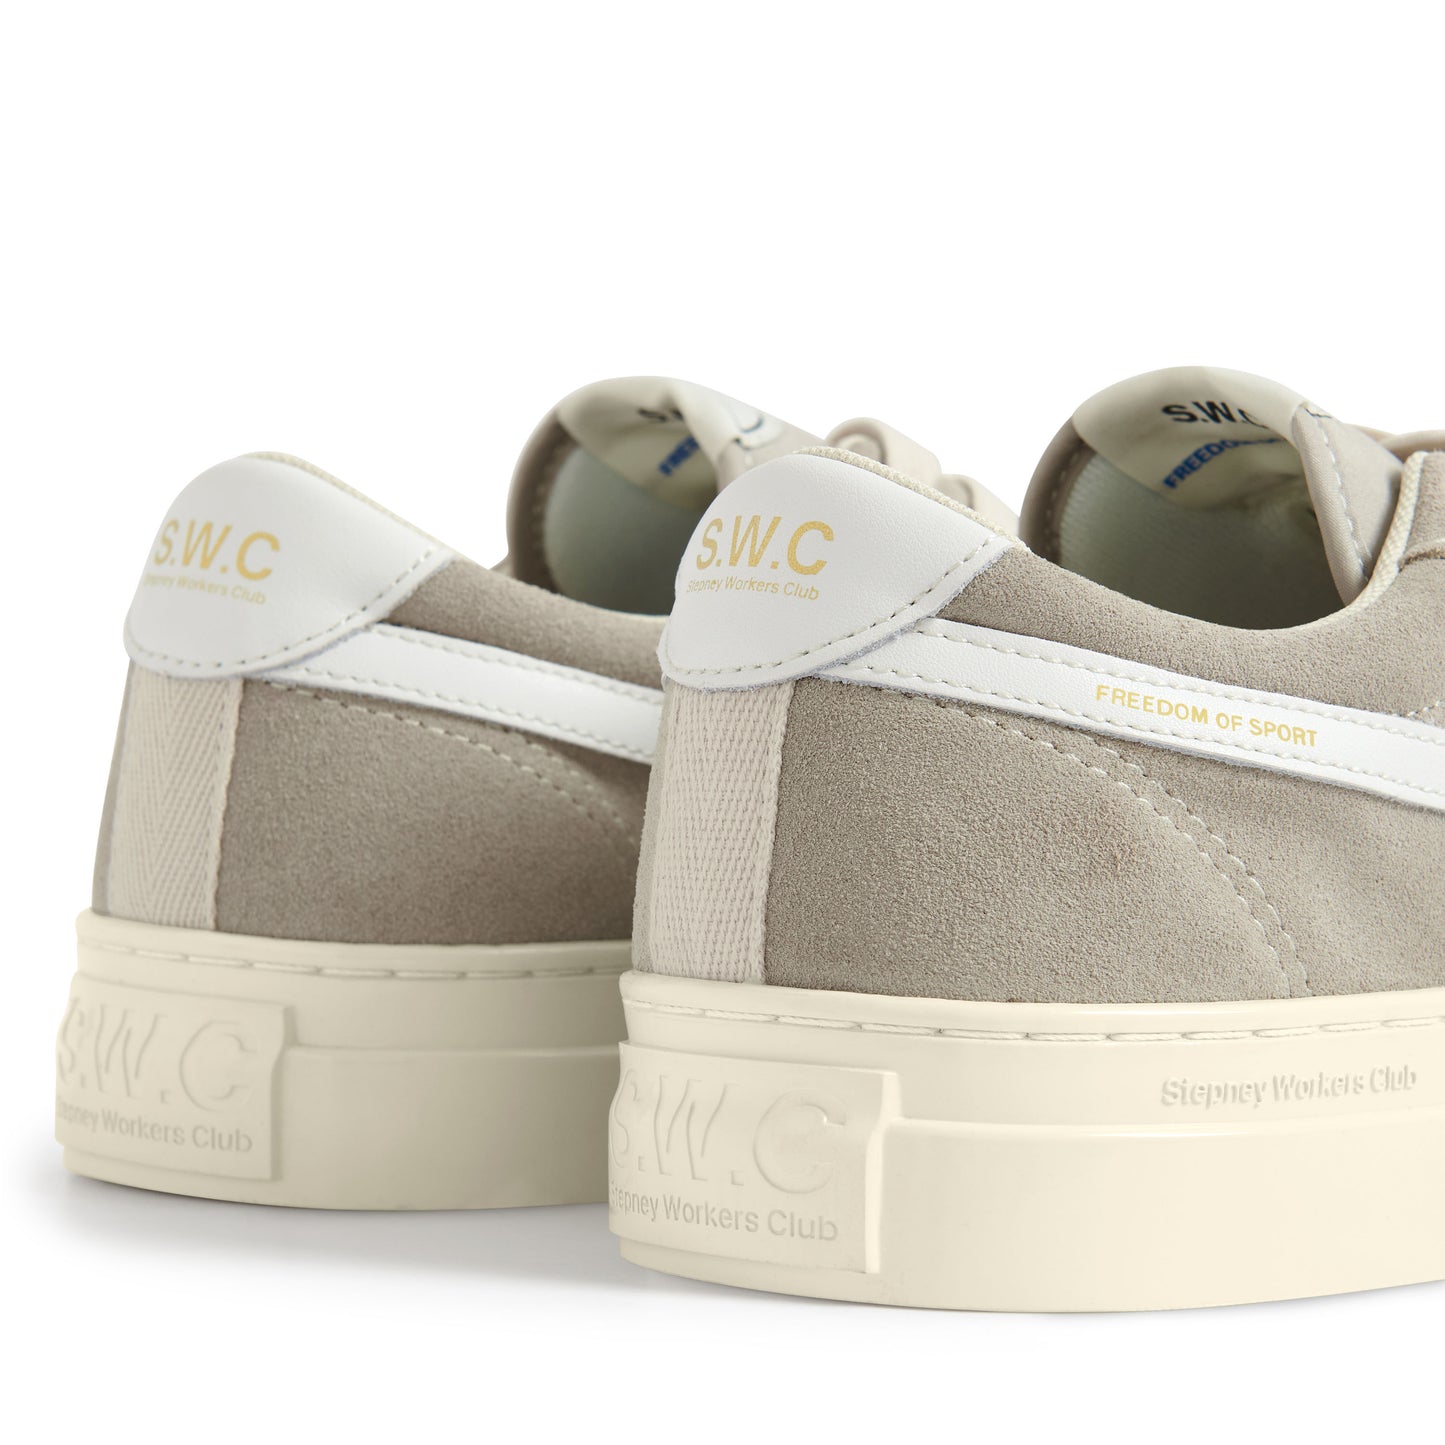 DELLOW S-STRIKE CUP SUEDE LIGHT GREY-WHITE